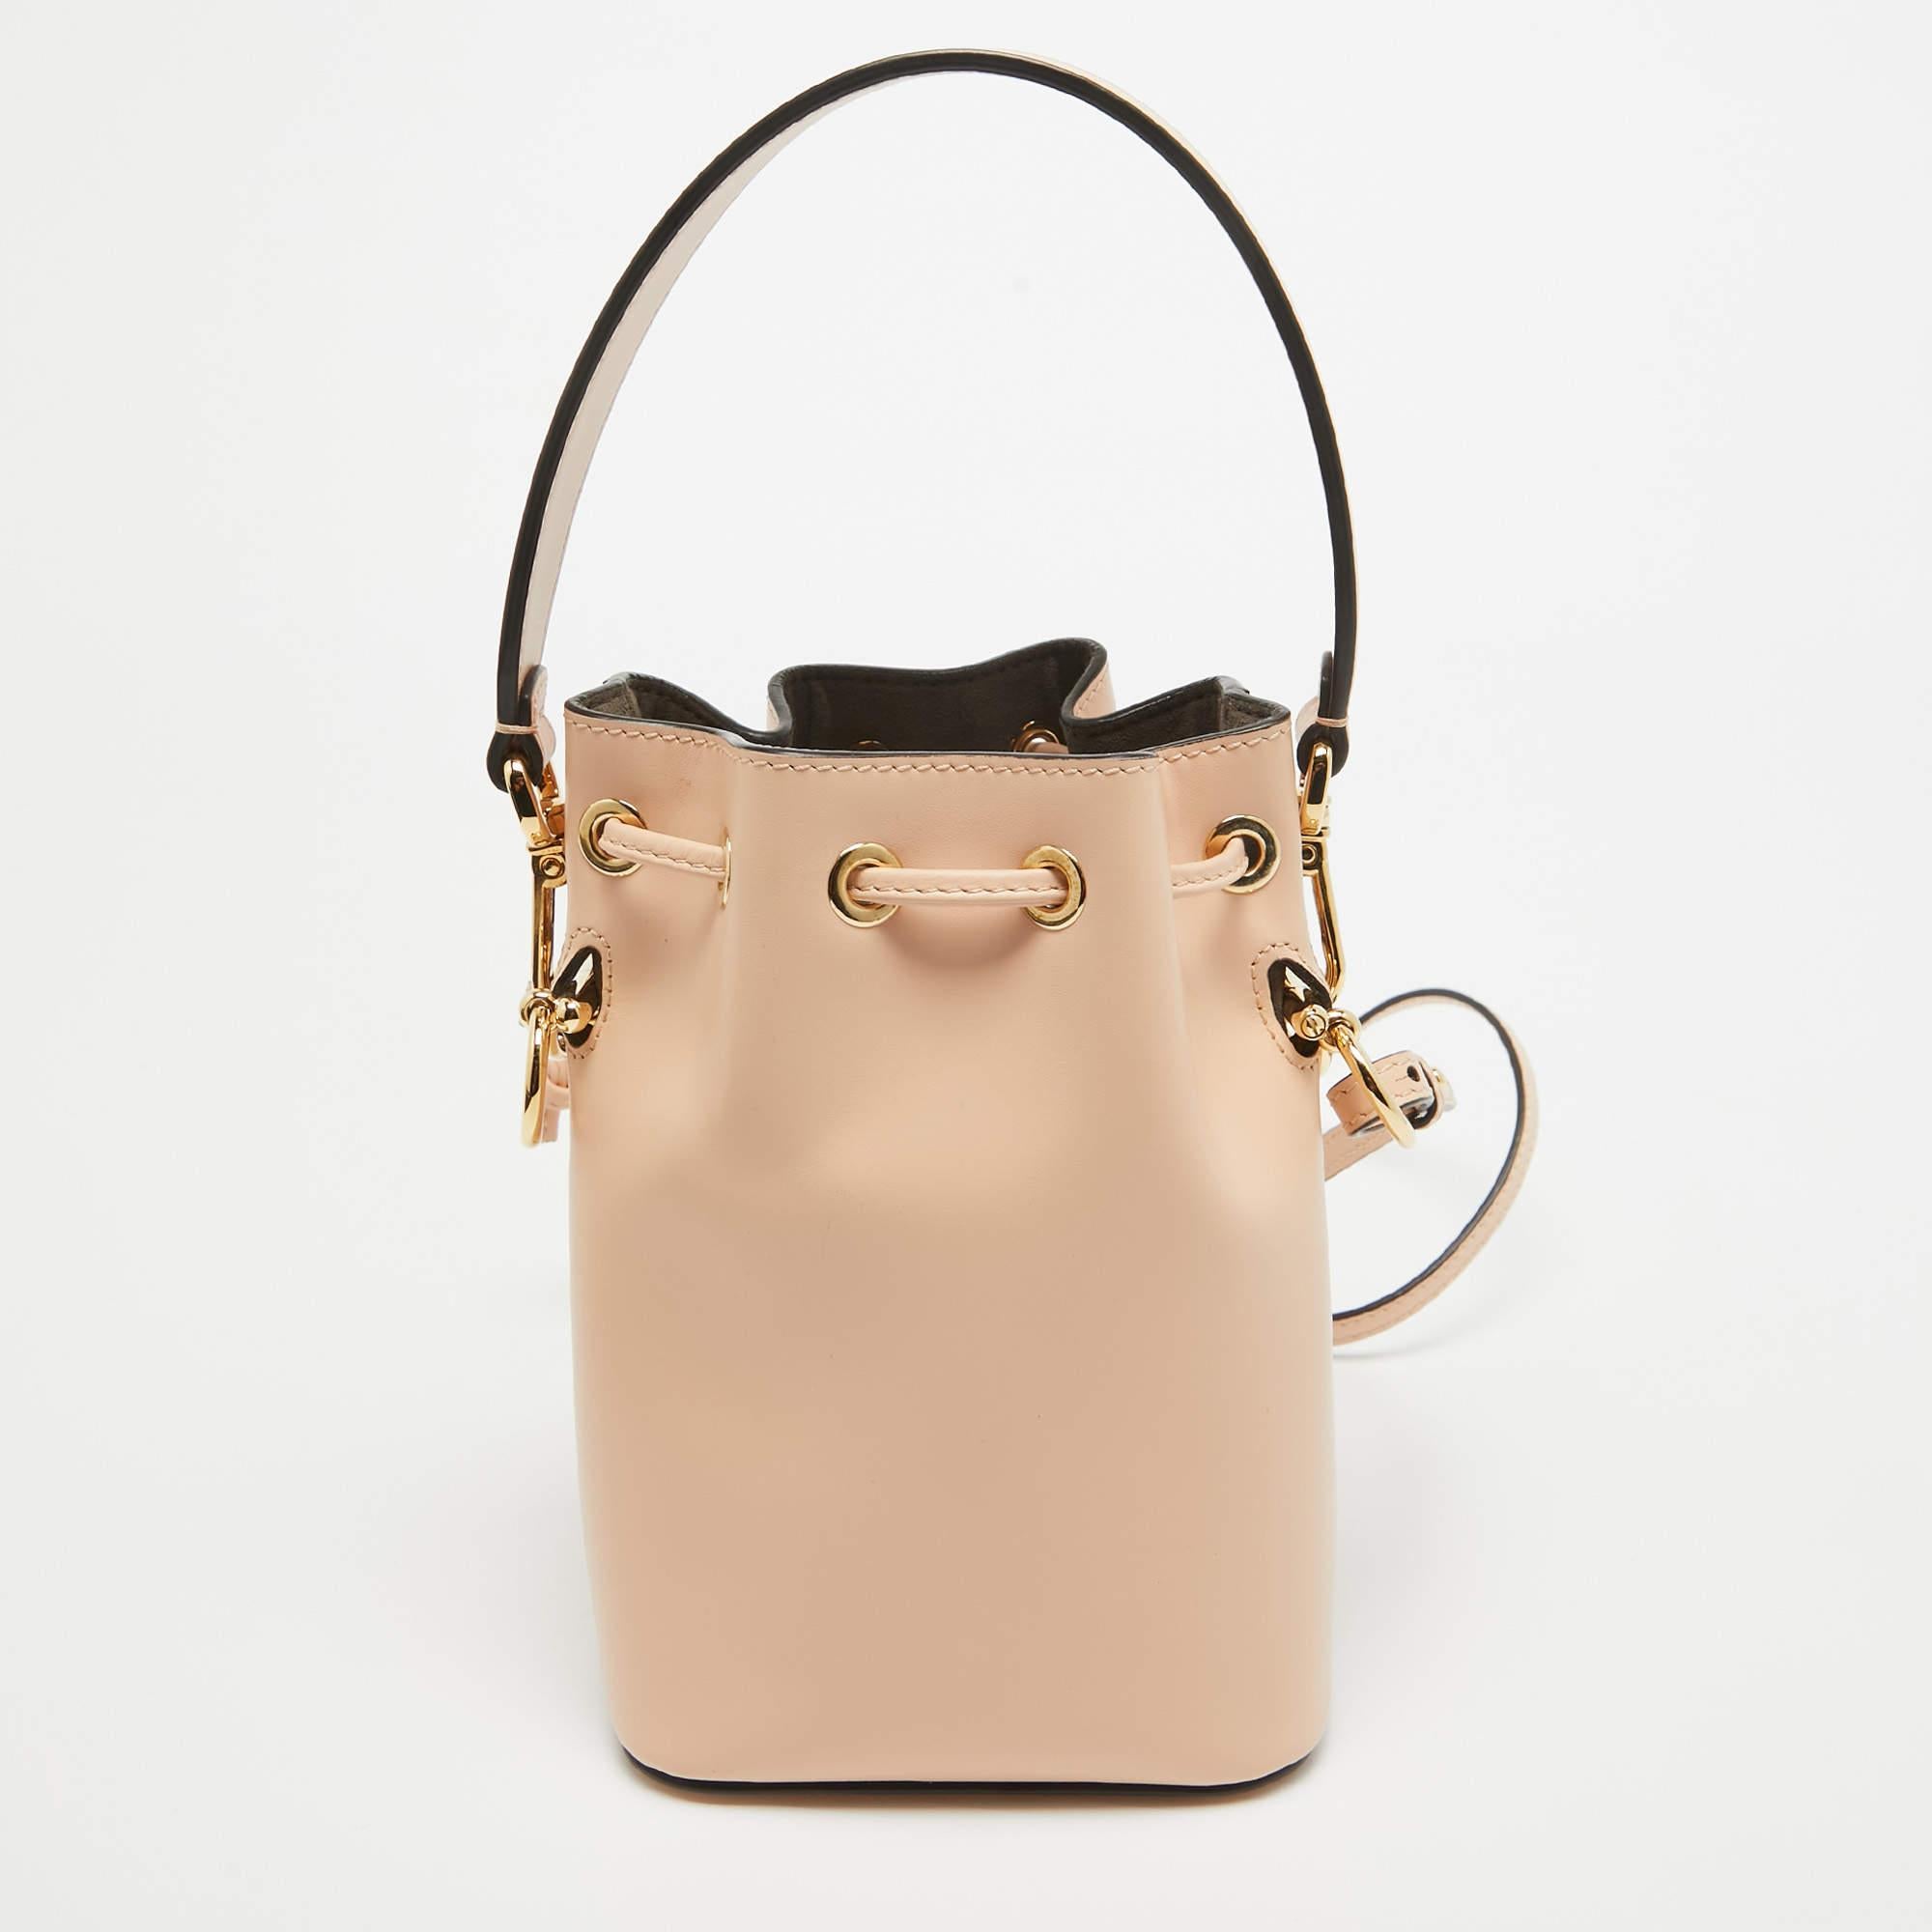 This wonderful Fendi design is made from leather and enhanced with gold-tone hardware. The bag has a bucket shape with a drawstring closure that secures the suede interior. It is complete with a single handle and a shoulder strap. Peach in color, it